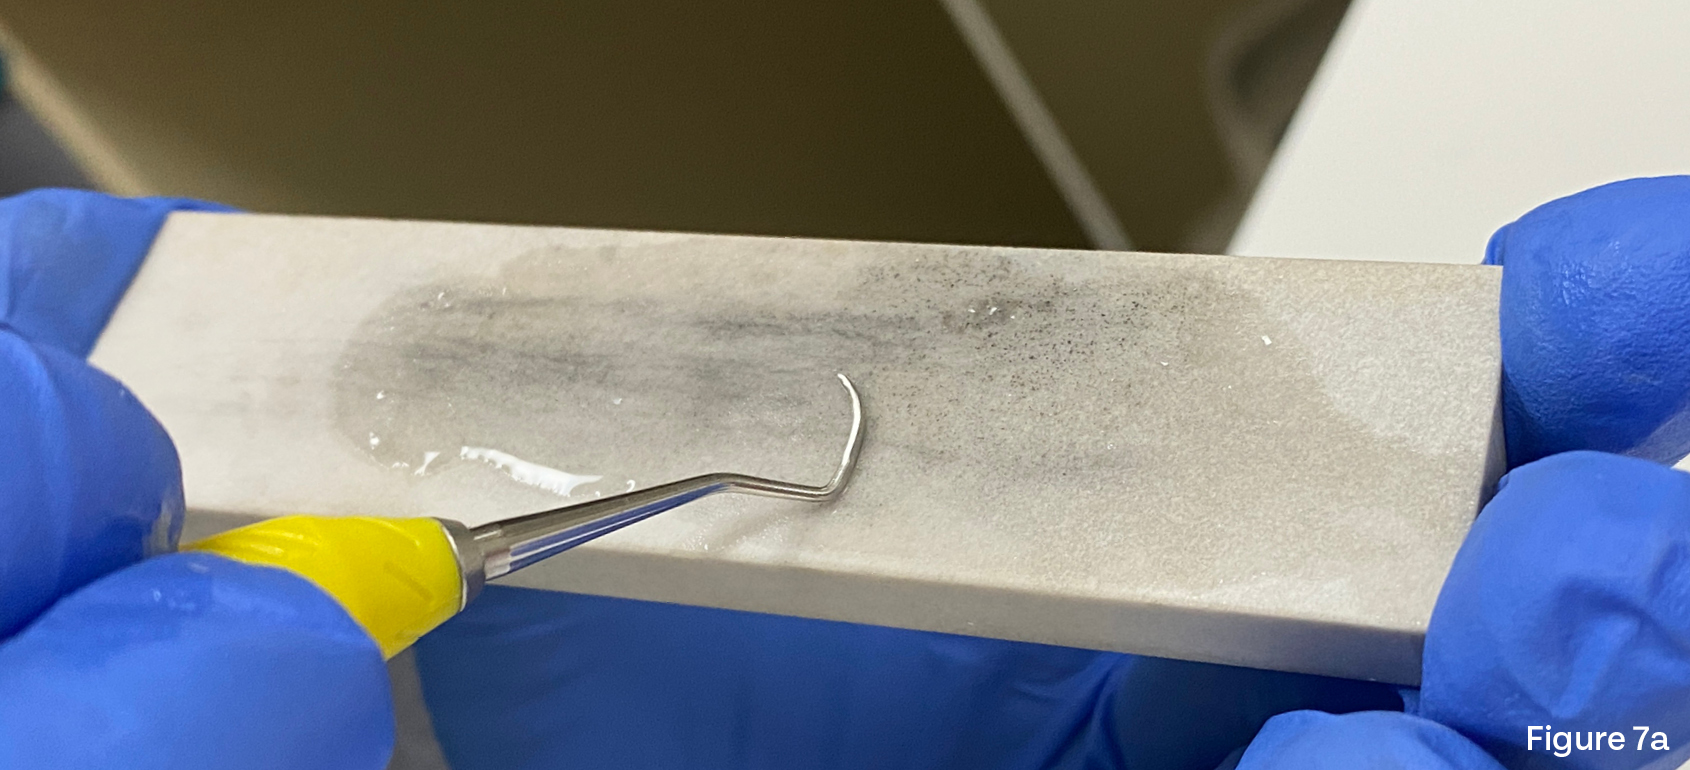 Image showing a curved curette on a sharpening stone